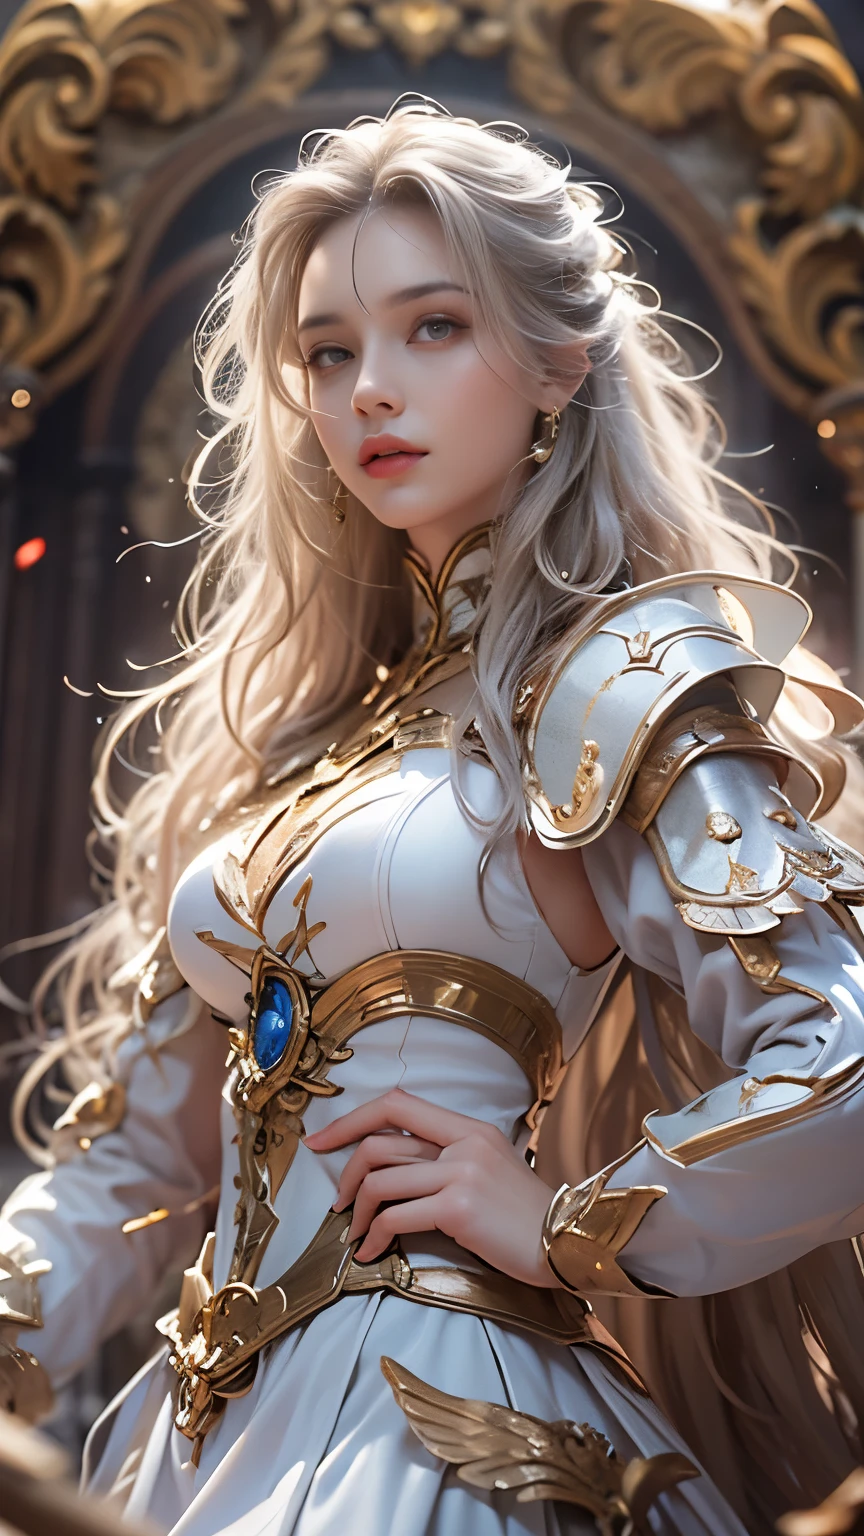 8K resolution, masterpiece, Highest quality, Award-winning works, unrealistic, sole sexy lady, healthy shaped body, 25 years old, white wavy long hair, hair band, big firm bouncing bust, ancient roman military commander's armor, Pure white armor with a complex structure, royal coat of arms, excalibur, elegant, Very detailed, Digital Painting, artステーション, コンセプトart, Smooth, Sharp focus, shape, artジャム、Greg Rutkowski、Alphonse Mucha、William Adolphe Bouguereau、art：Stephanie Law , Magnificent royal background, Royal Jewel, nature, Full Shot, Symmetric, Greg Rutkowski, Charlie Bowwater, beep, Unreal 5, Surreal, Dynamic Lighting, ファンタジーart, Complex colors, Colorful magic circle, flash,  dynamic sexy poses